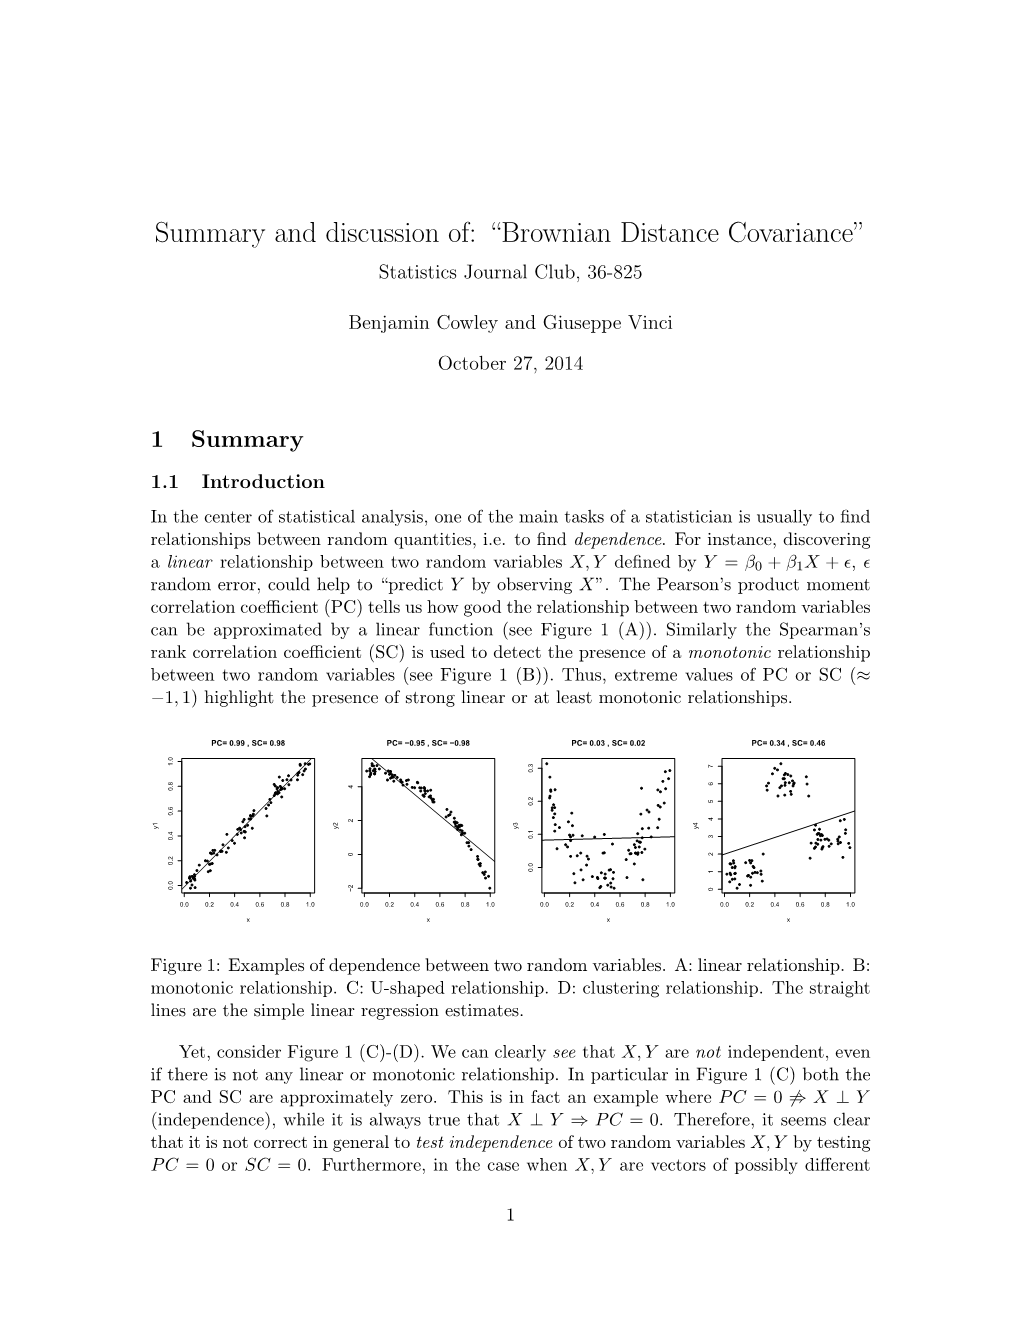 Summary and Discussion Of: “Brownian Distance Covariance” Statistics Journal Club, 36-825